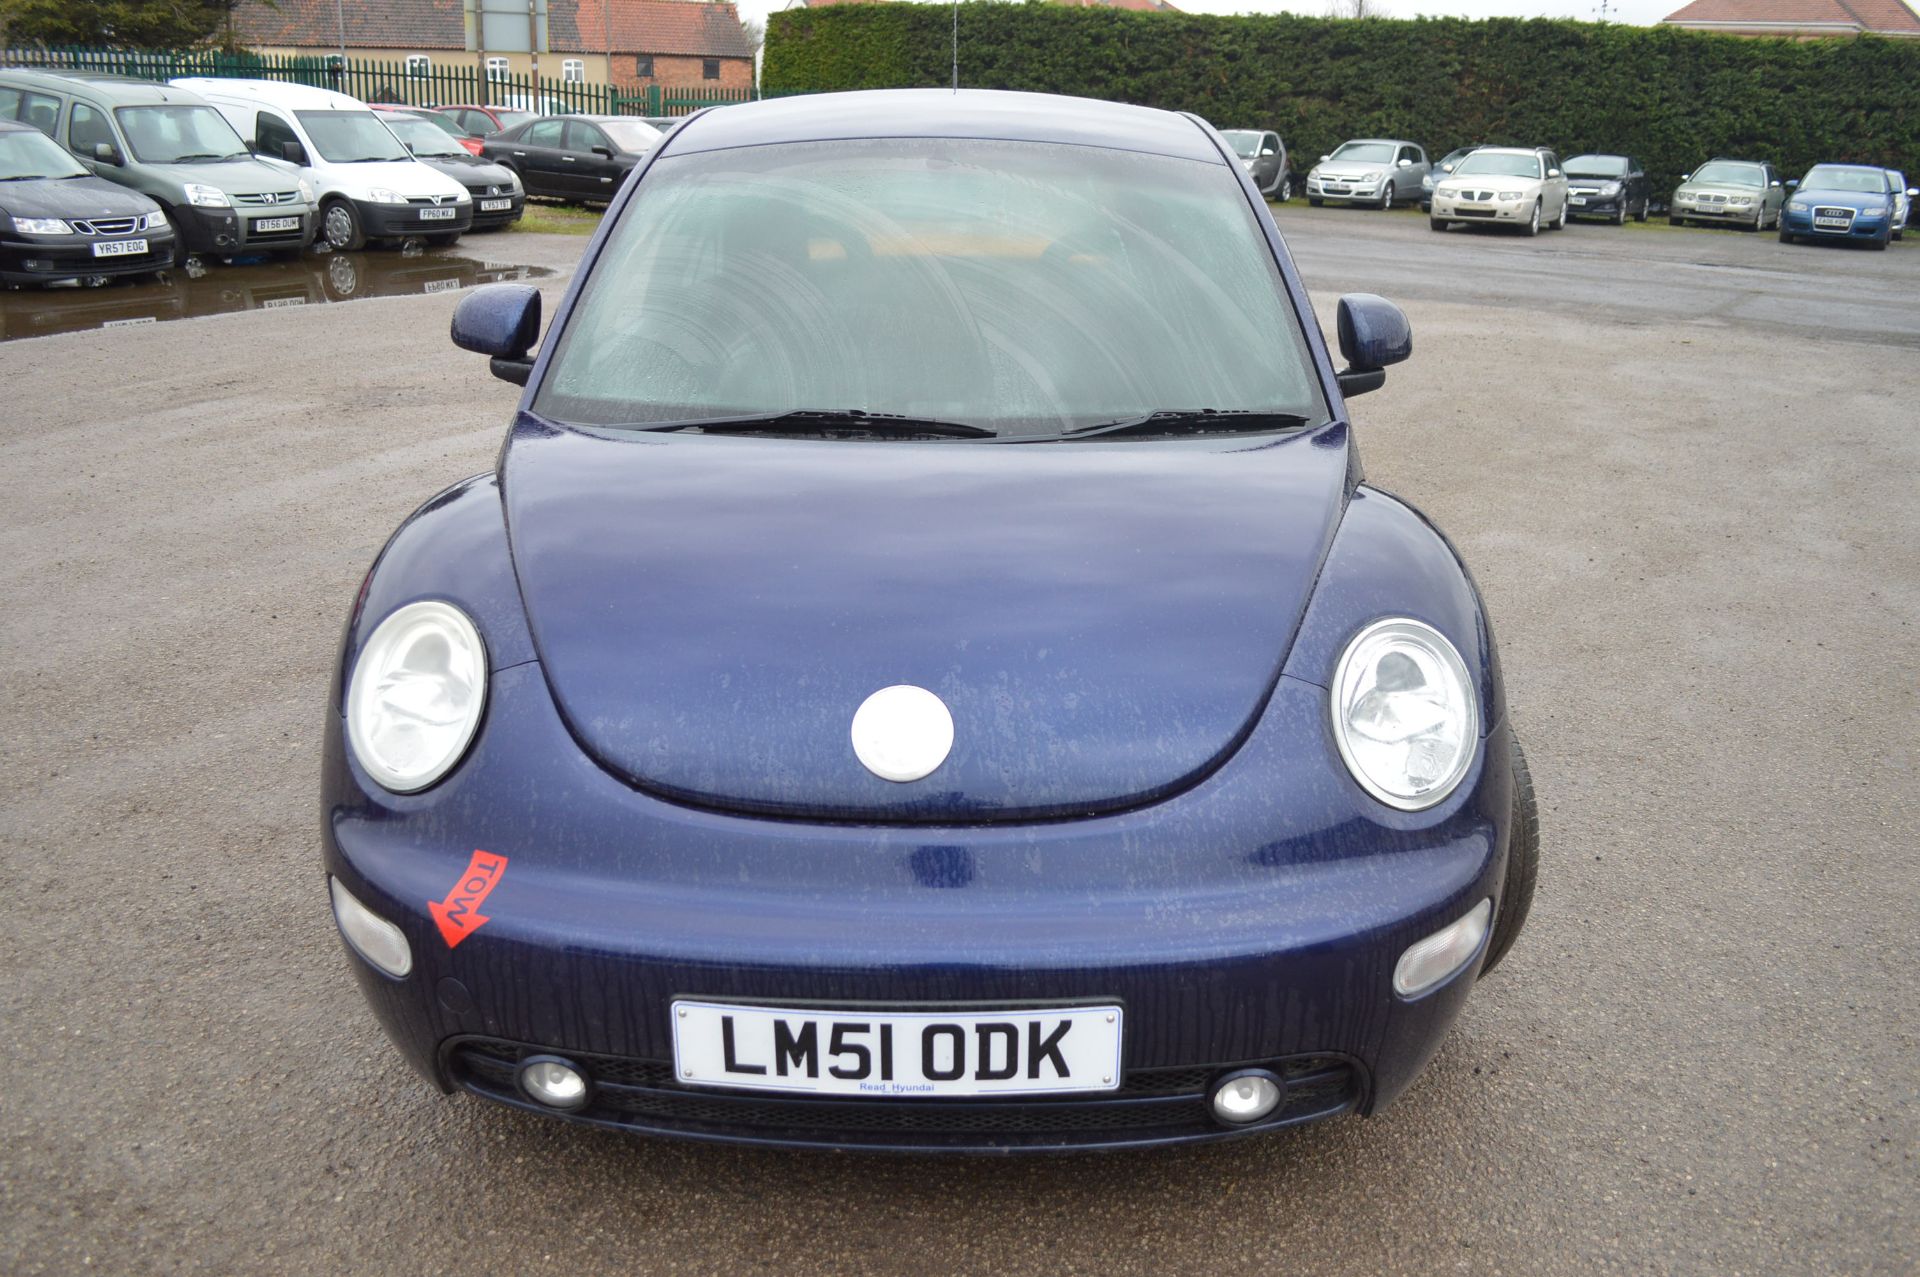 2001/51 REG VOLKSWAGEN BEETLE TURBO 1.8 TRACK CAR 5 SPEED MANUAL GOOD STRONG ENGINE AND BOX HAS JUST - Image 2 of 15